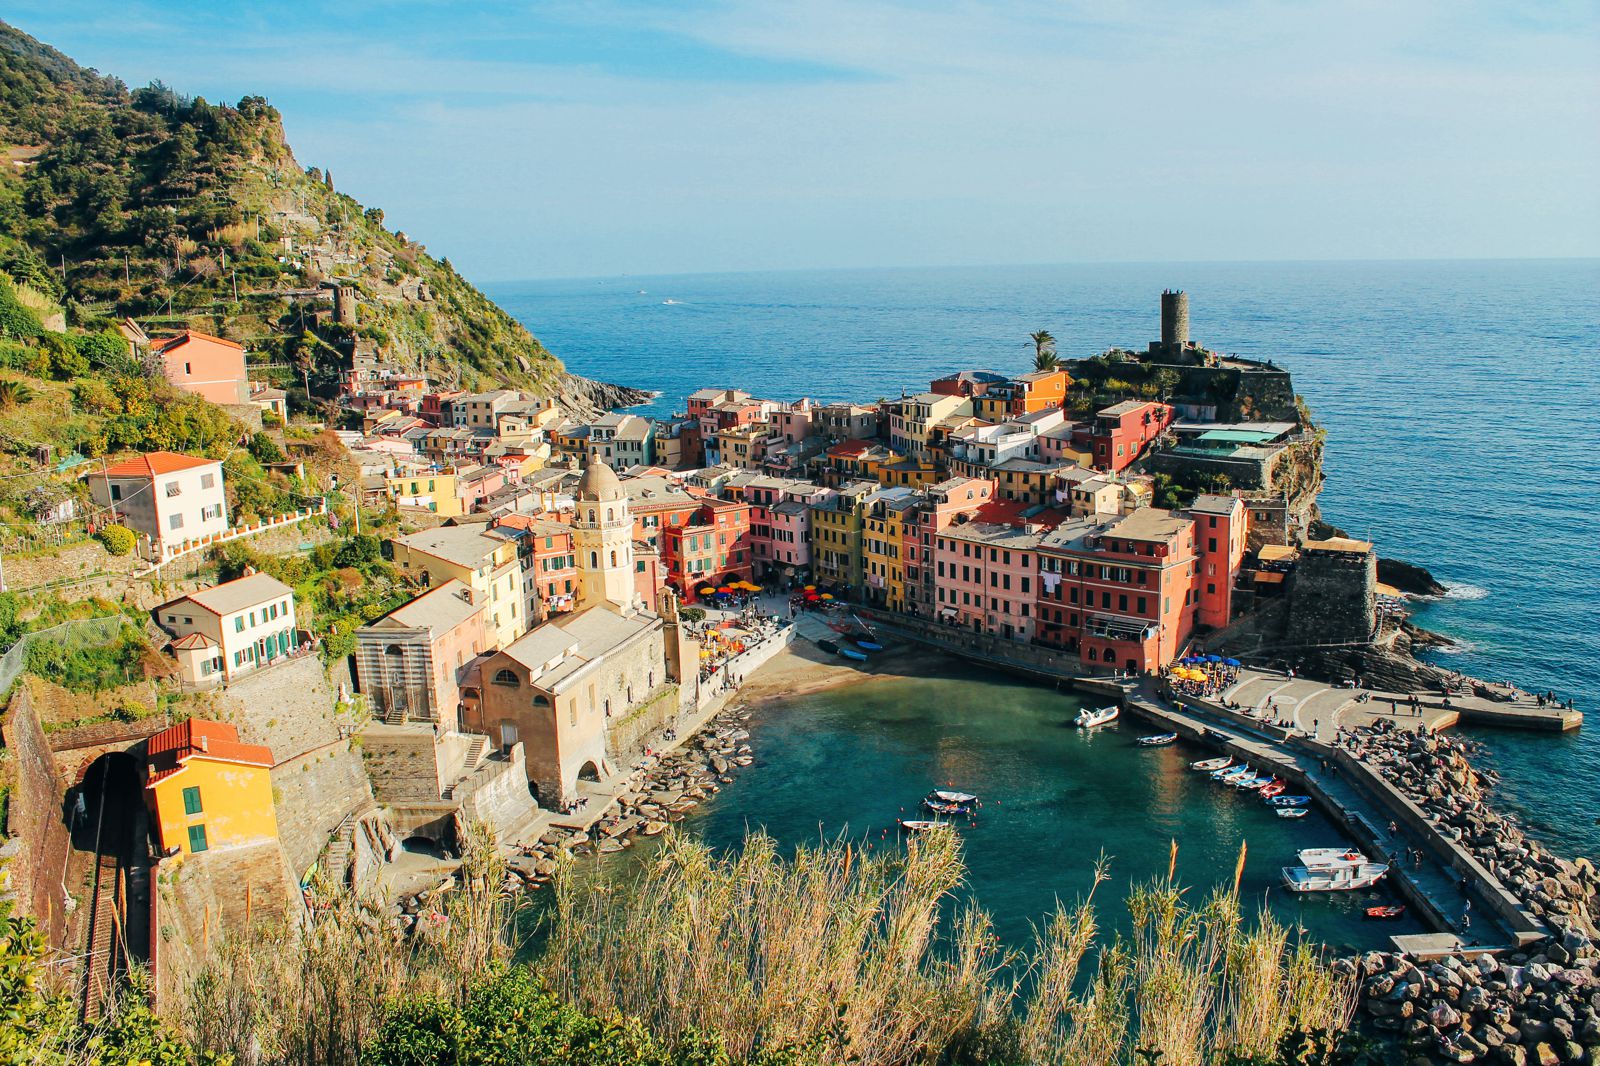 Vernazza in Cinque Terre, Italy - The Photo Diary! [4 of 5] (7)